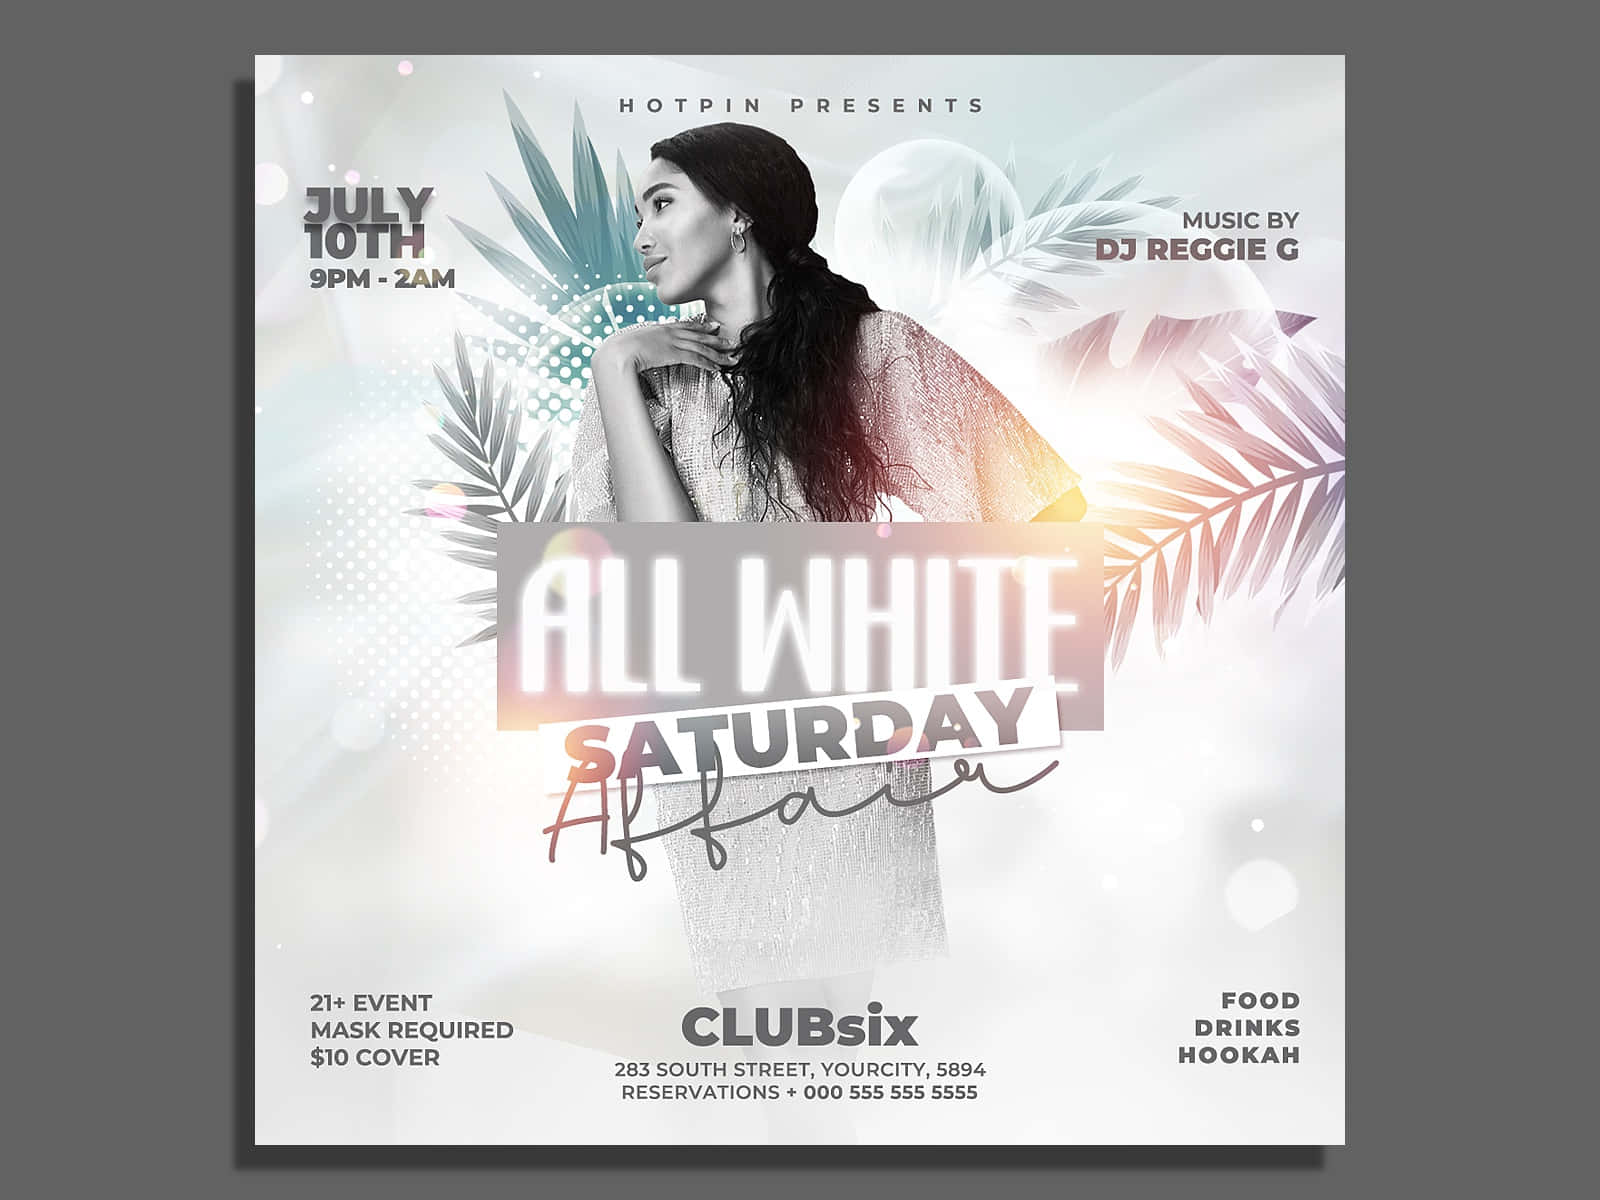 All White Saturday Affair Party Flyer Background